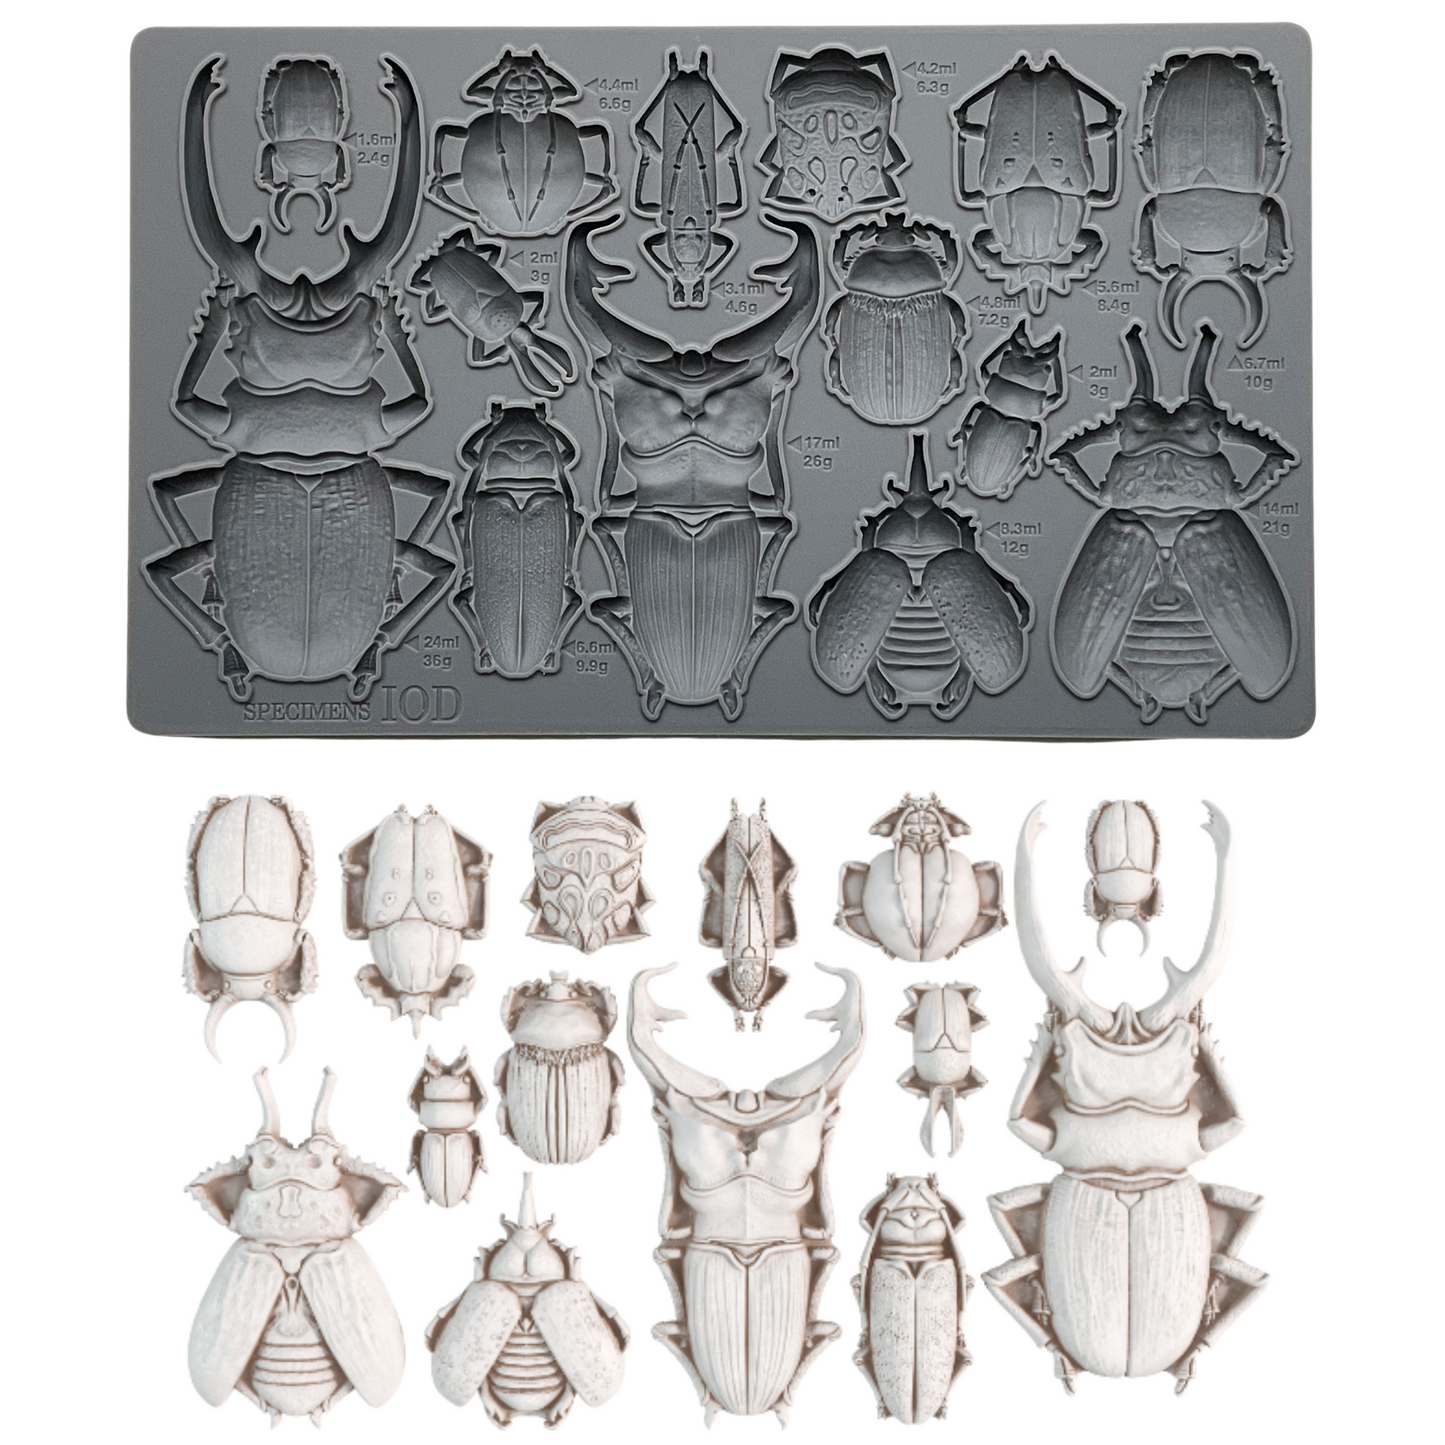 "Specimens" IOD Mould by Iron Orchid Designs. Mould and castings combination photo. Available at Milton's Daughter.